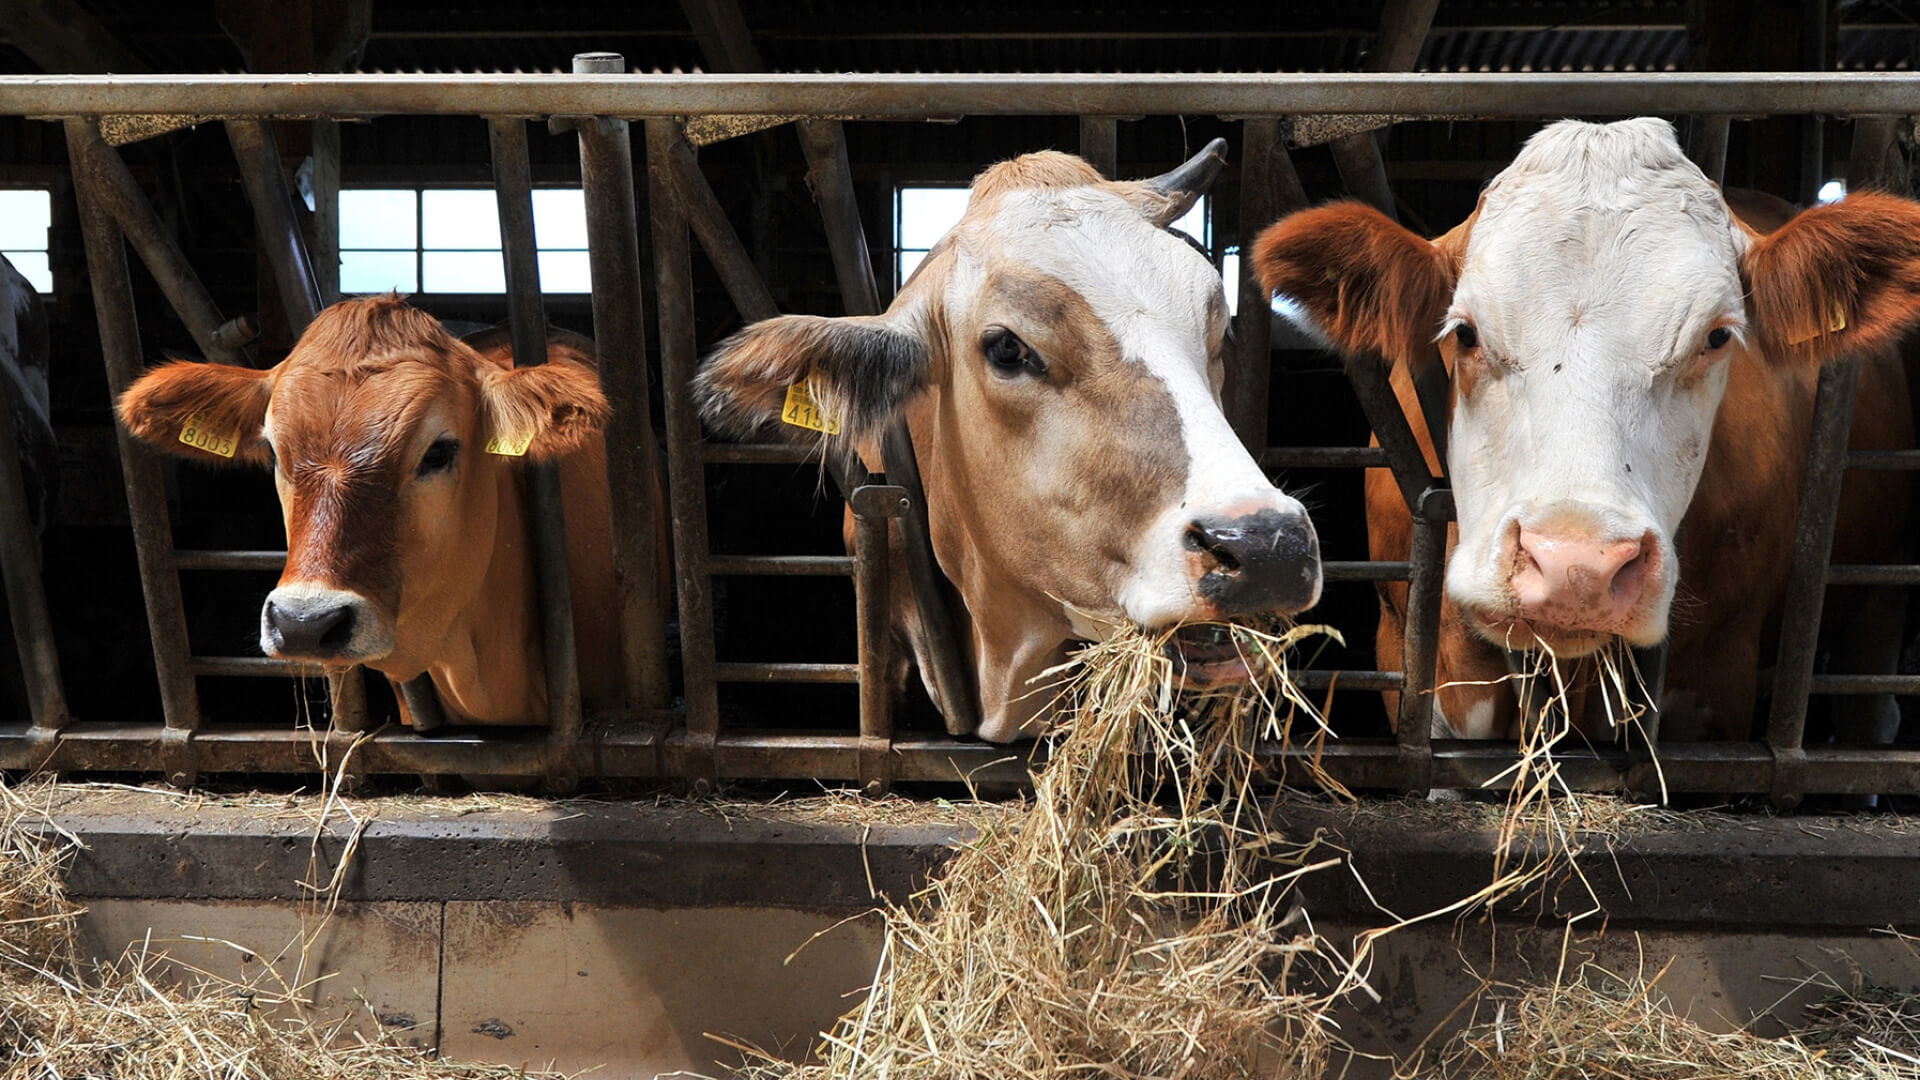 cows standing in an open barn, recycling of waste in the animal processing industry